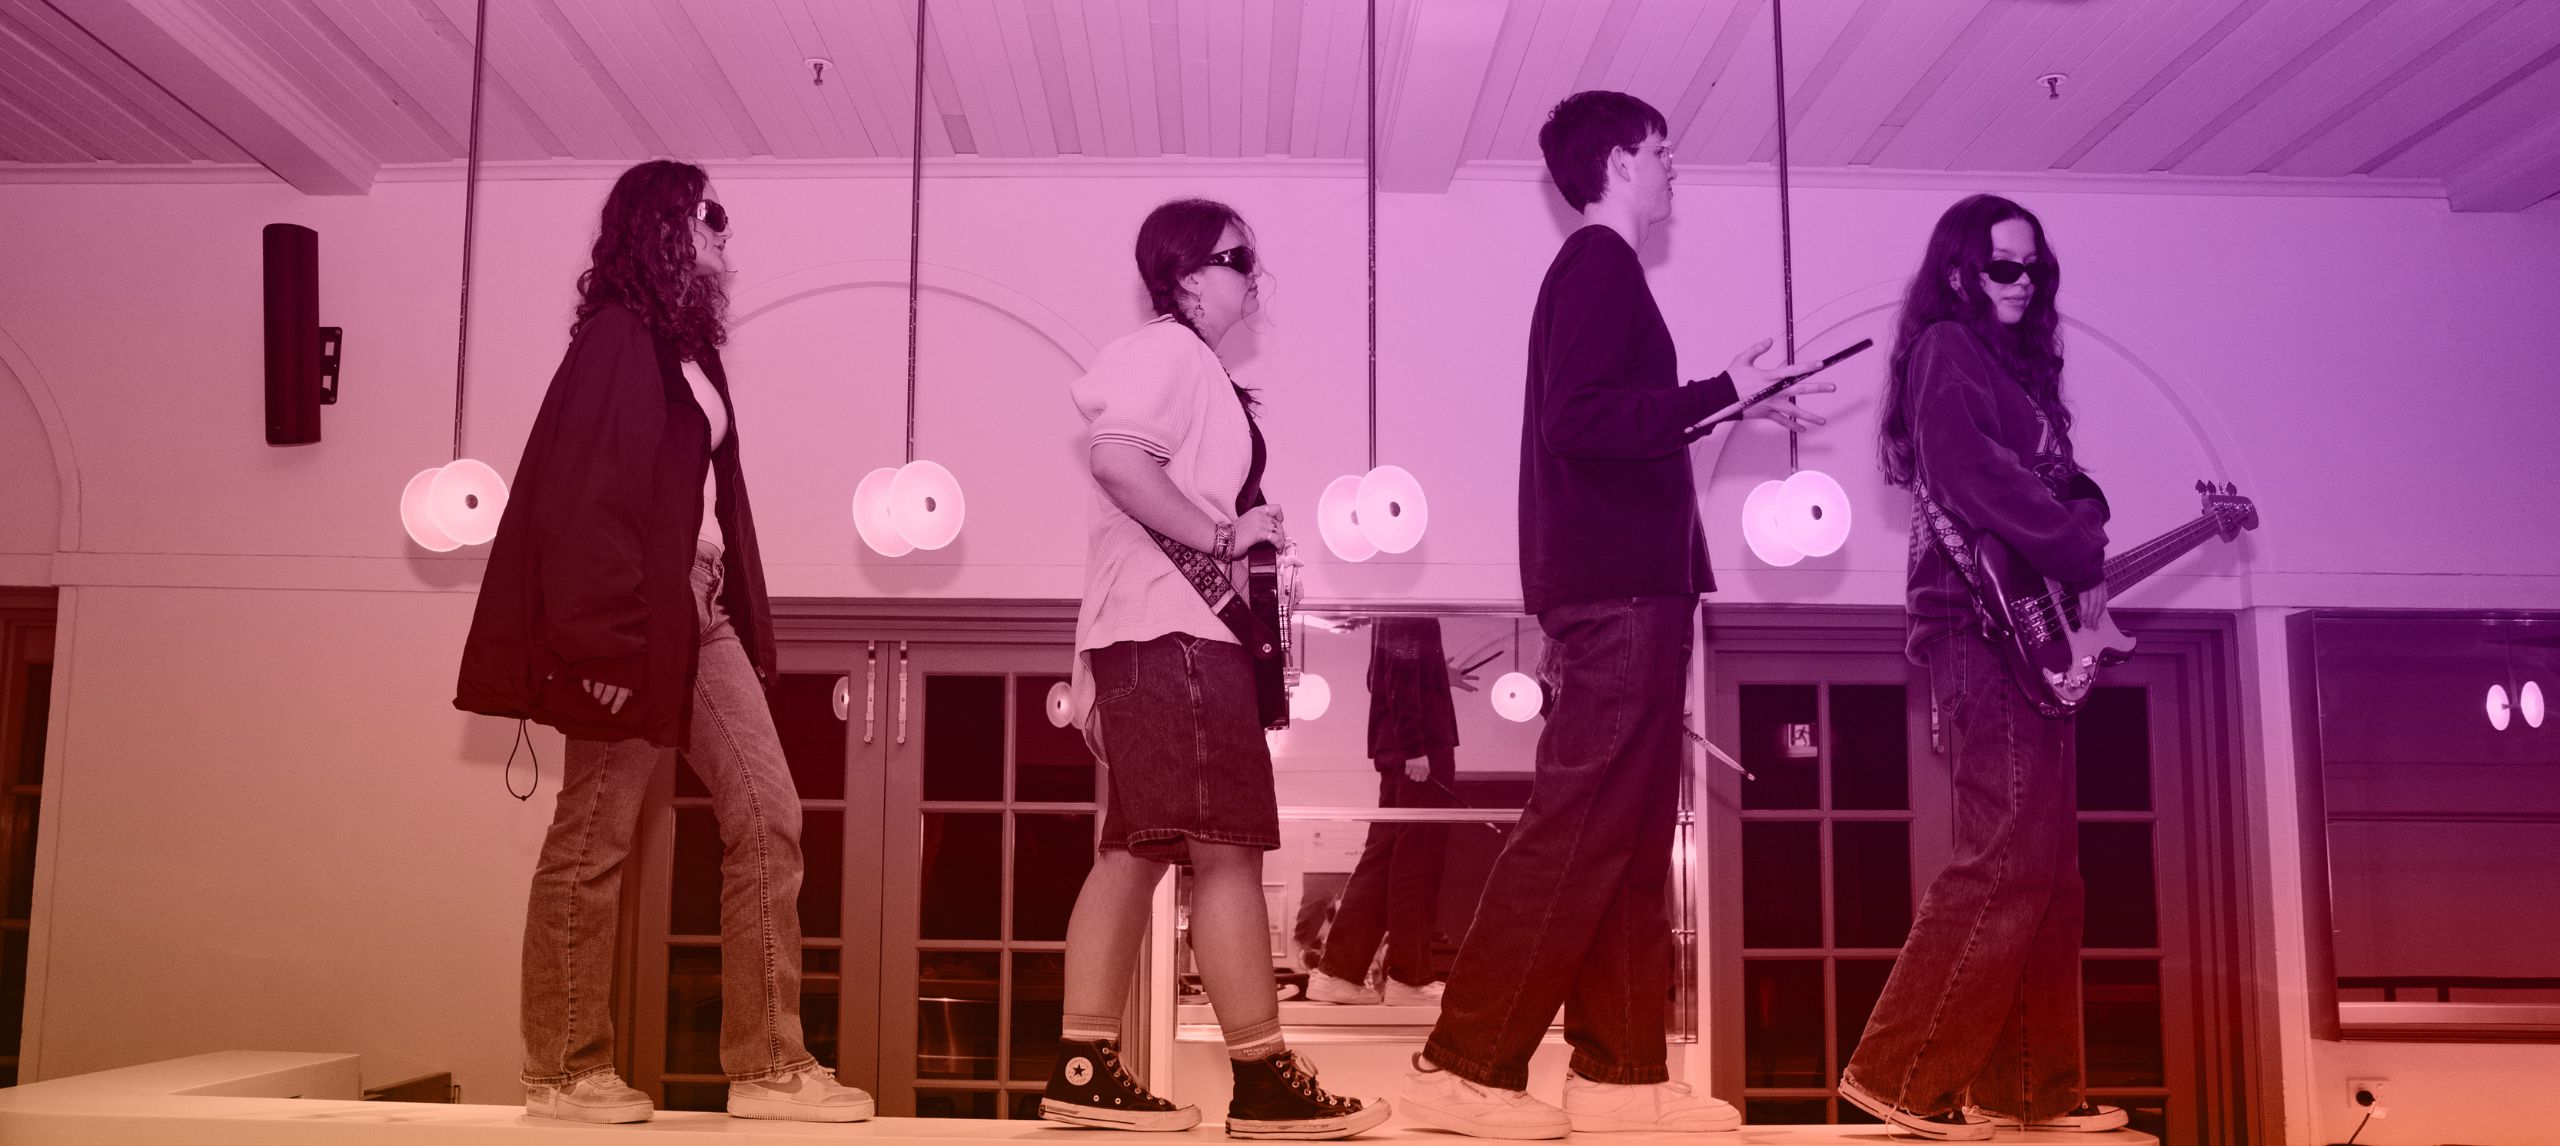 4 music students standing on top of bar facing towards the right with their instruments